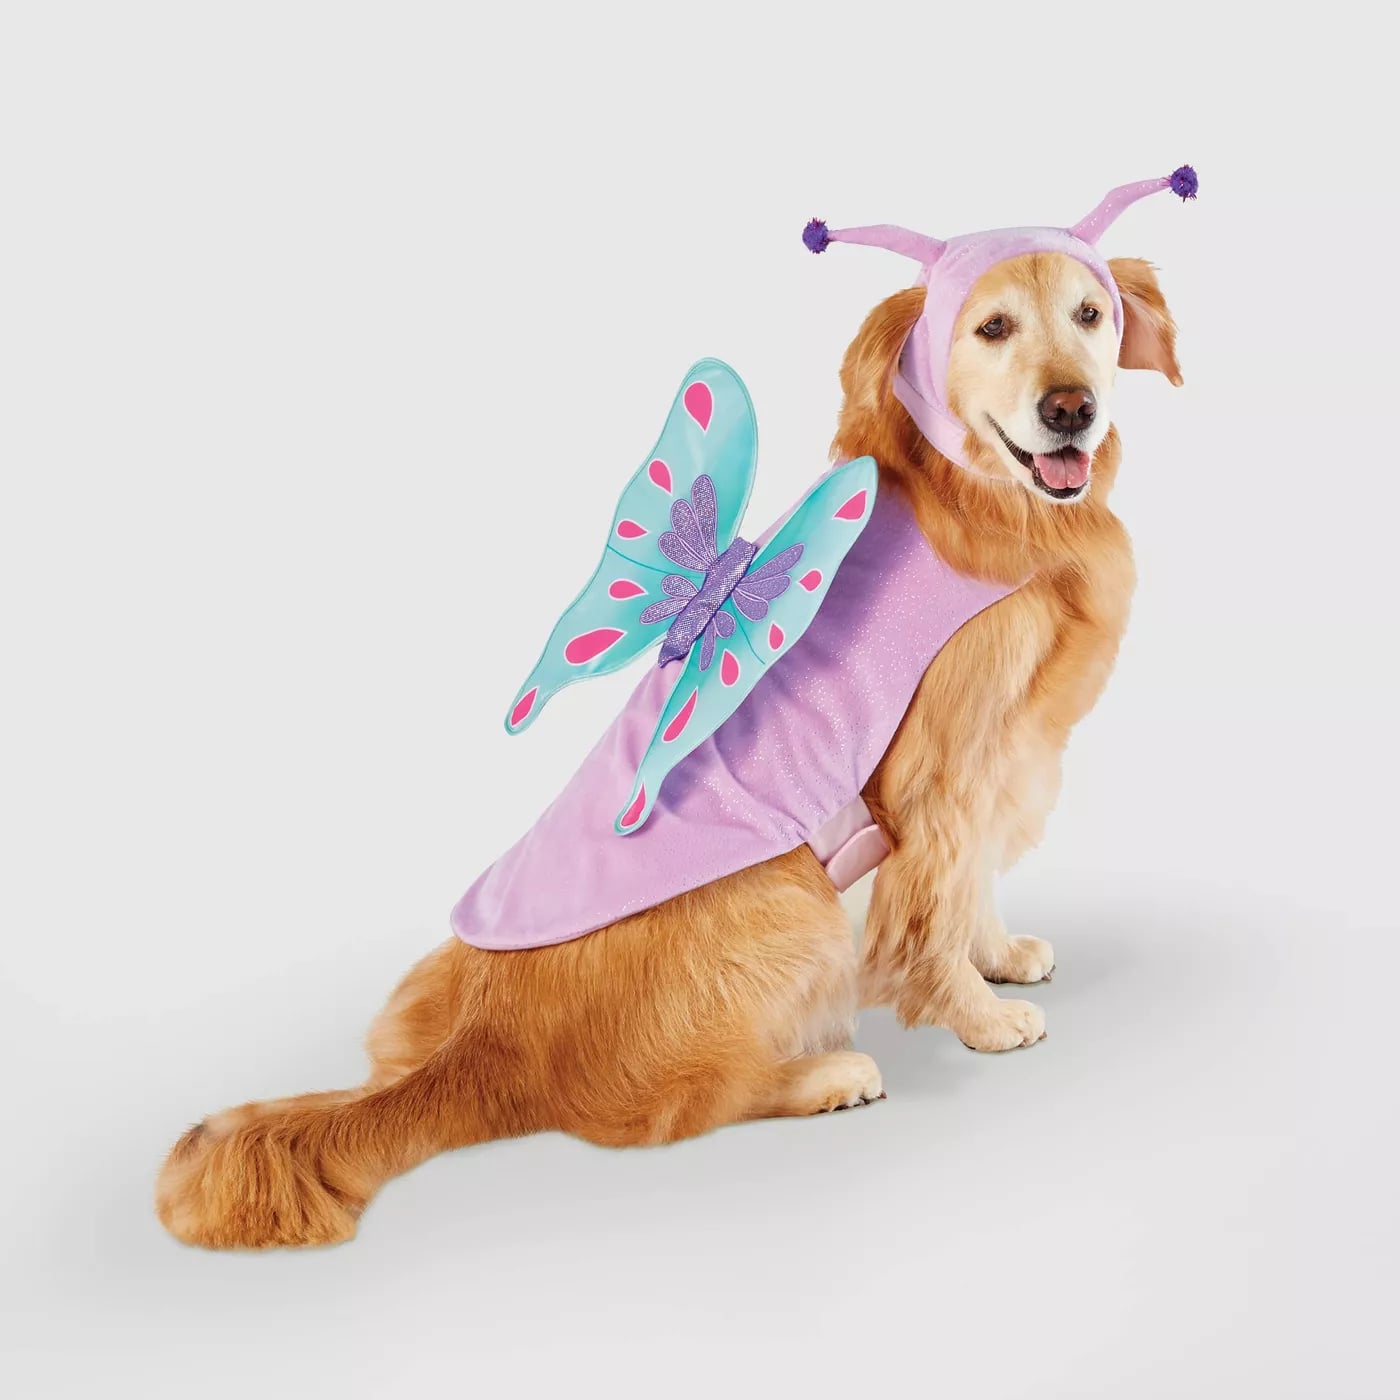 10+ Fun Pet Halloween Costumes (For dogs and cats)